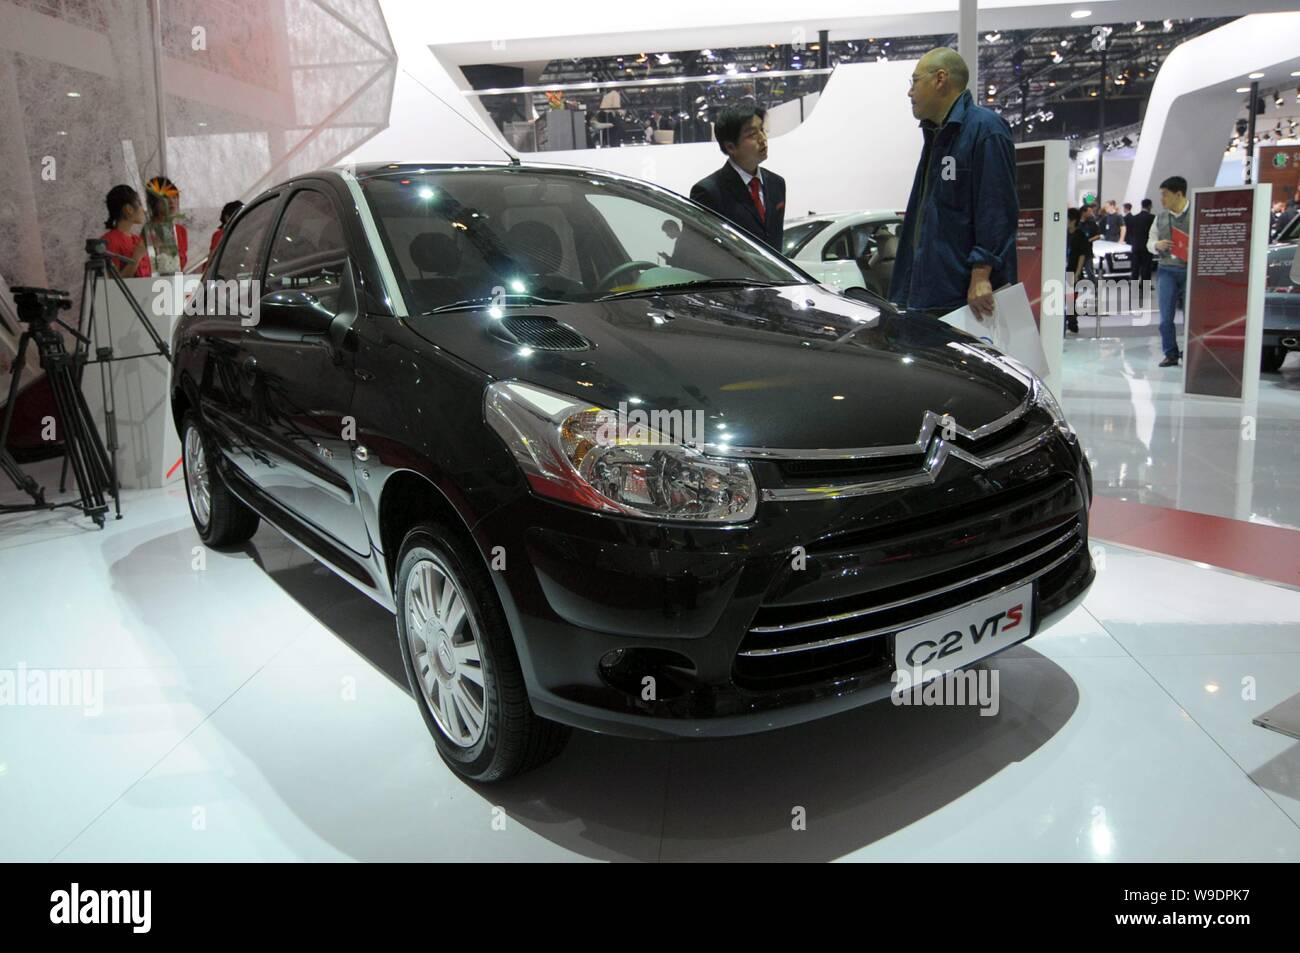 --FILE--Chinese visitors look at a Citroen C2 VTS at the Auto China 2008 car show in Beijing, China, 20 April 2008.   A senior official from PSA Peuge Stock Photo